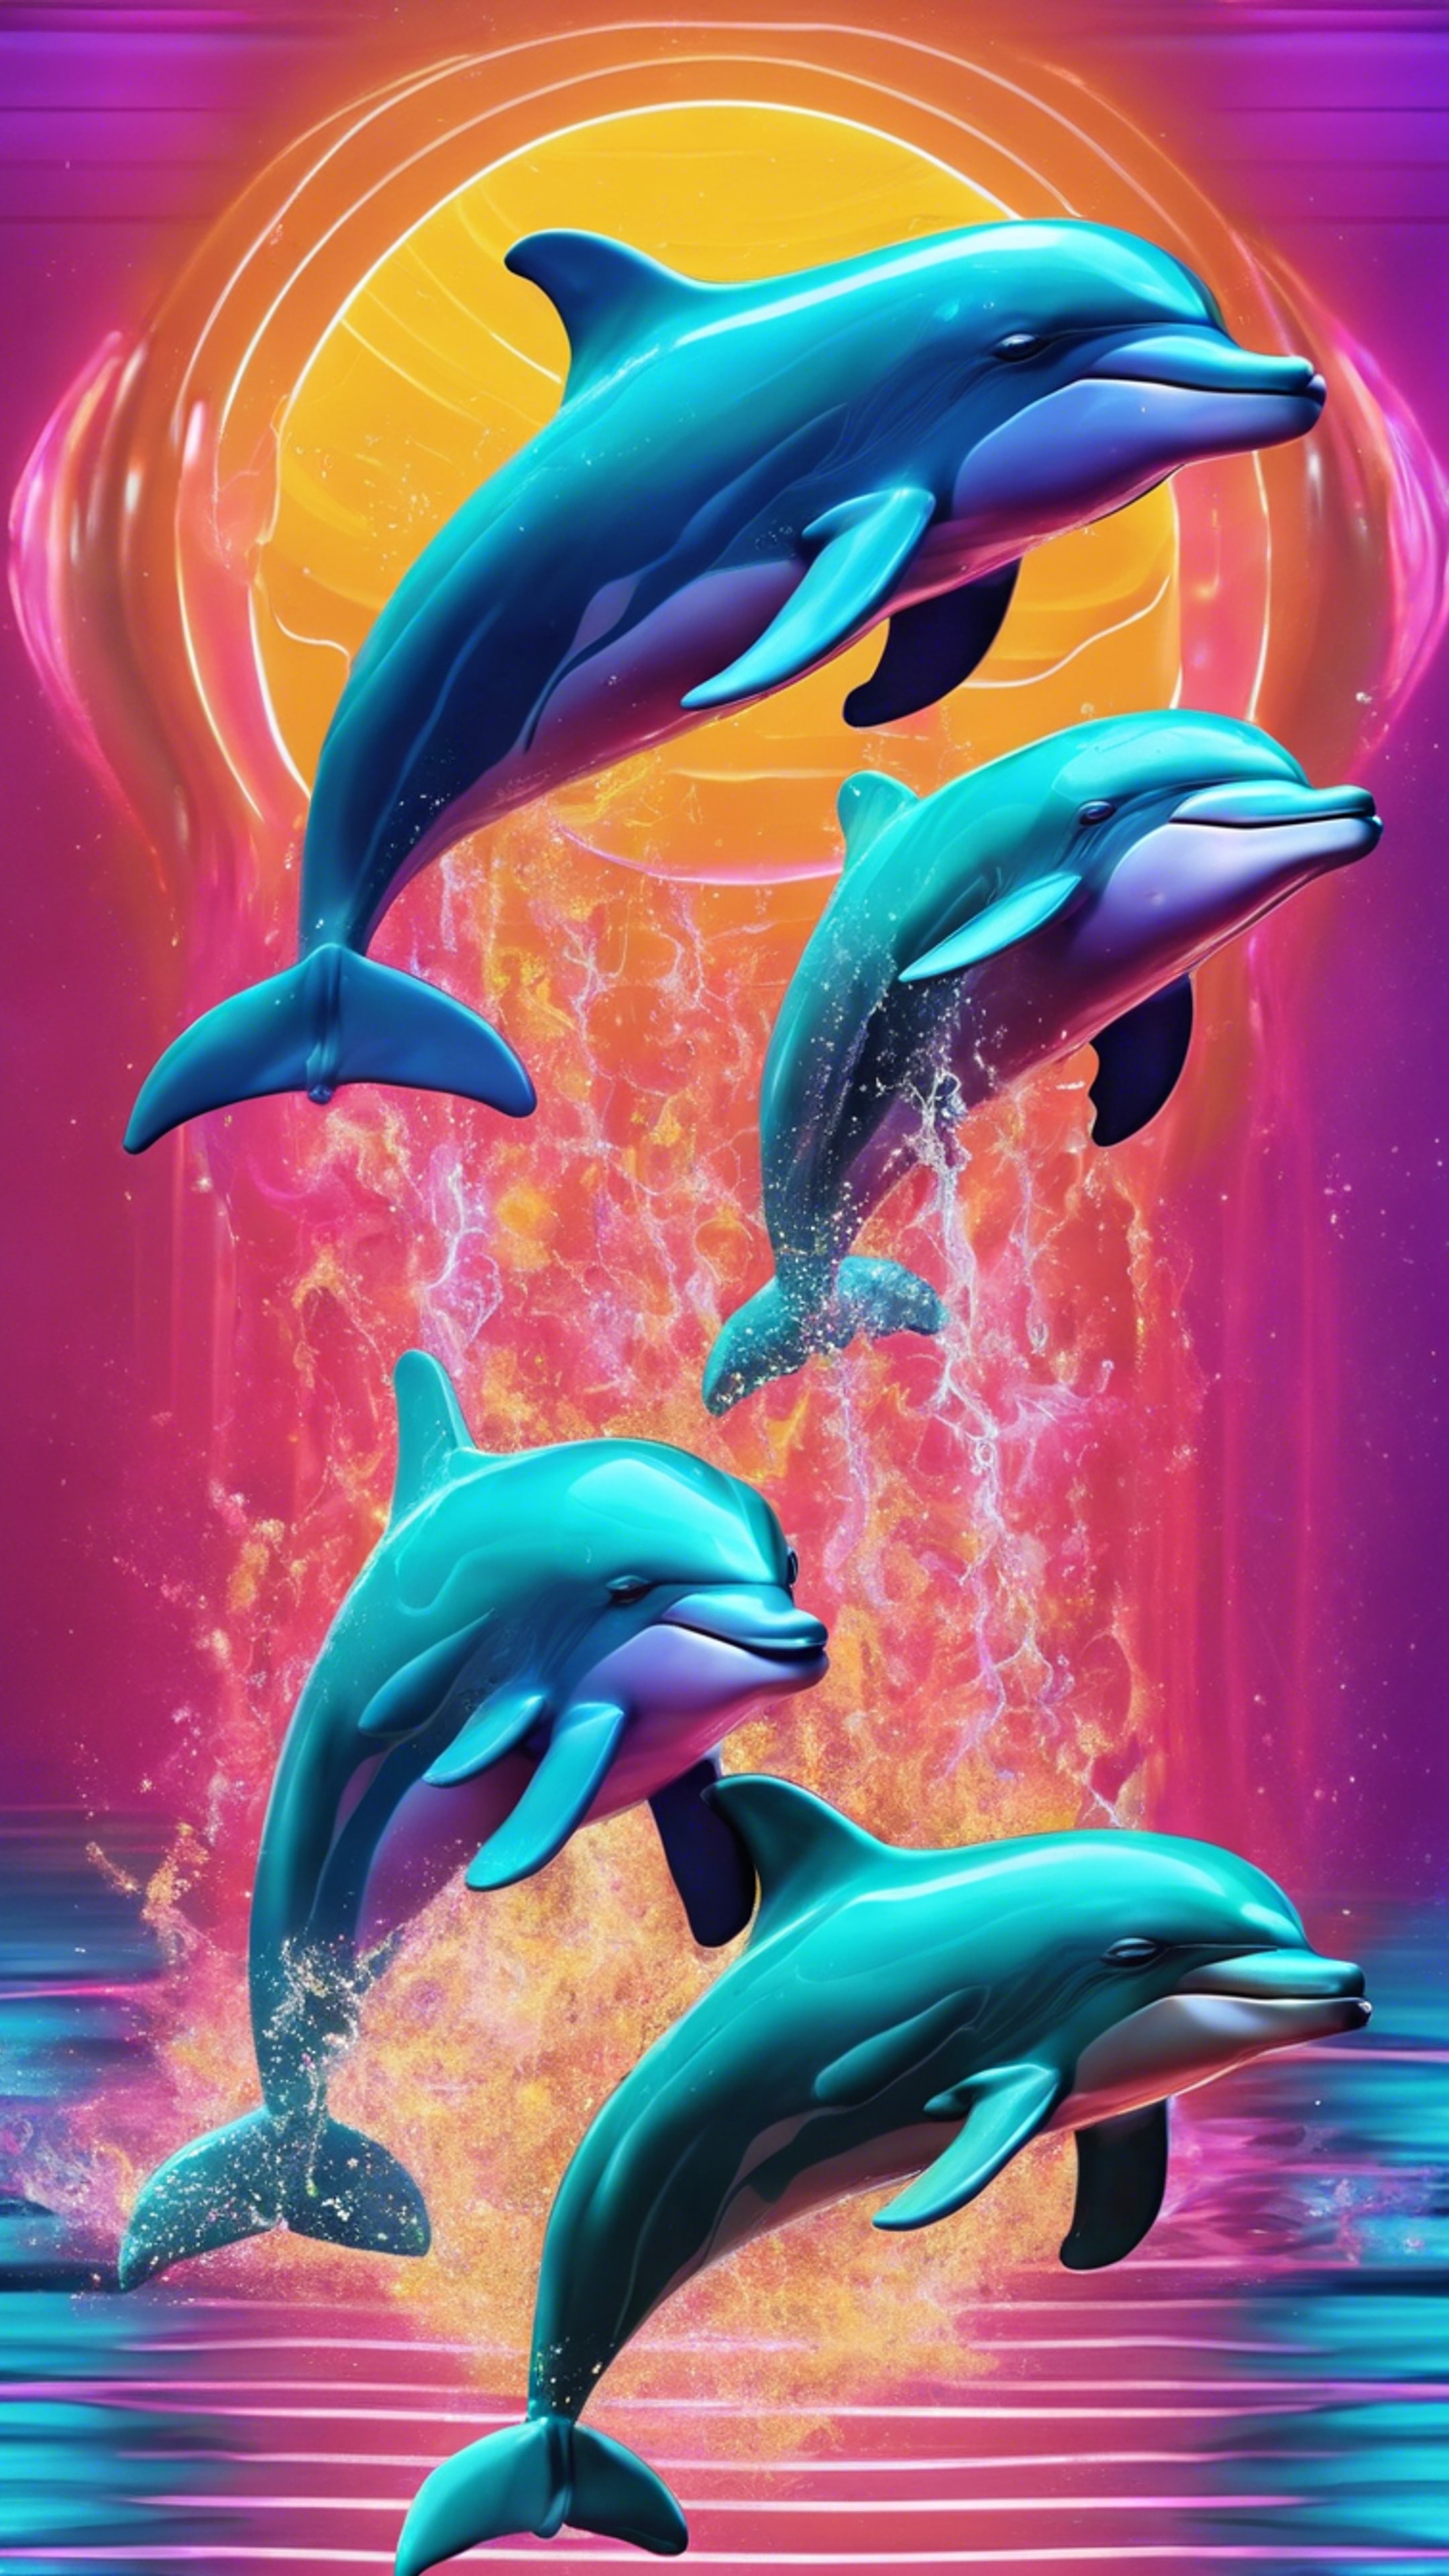 Robotic Y2K dolphins leaping over neon waves in a digital ocean. Kertas dinding[ad0dac3c3f9a44adb514]